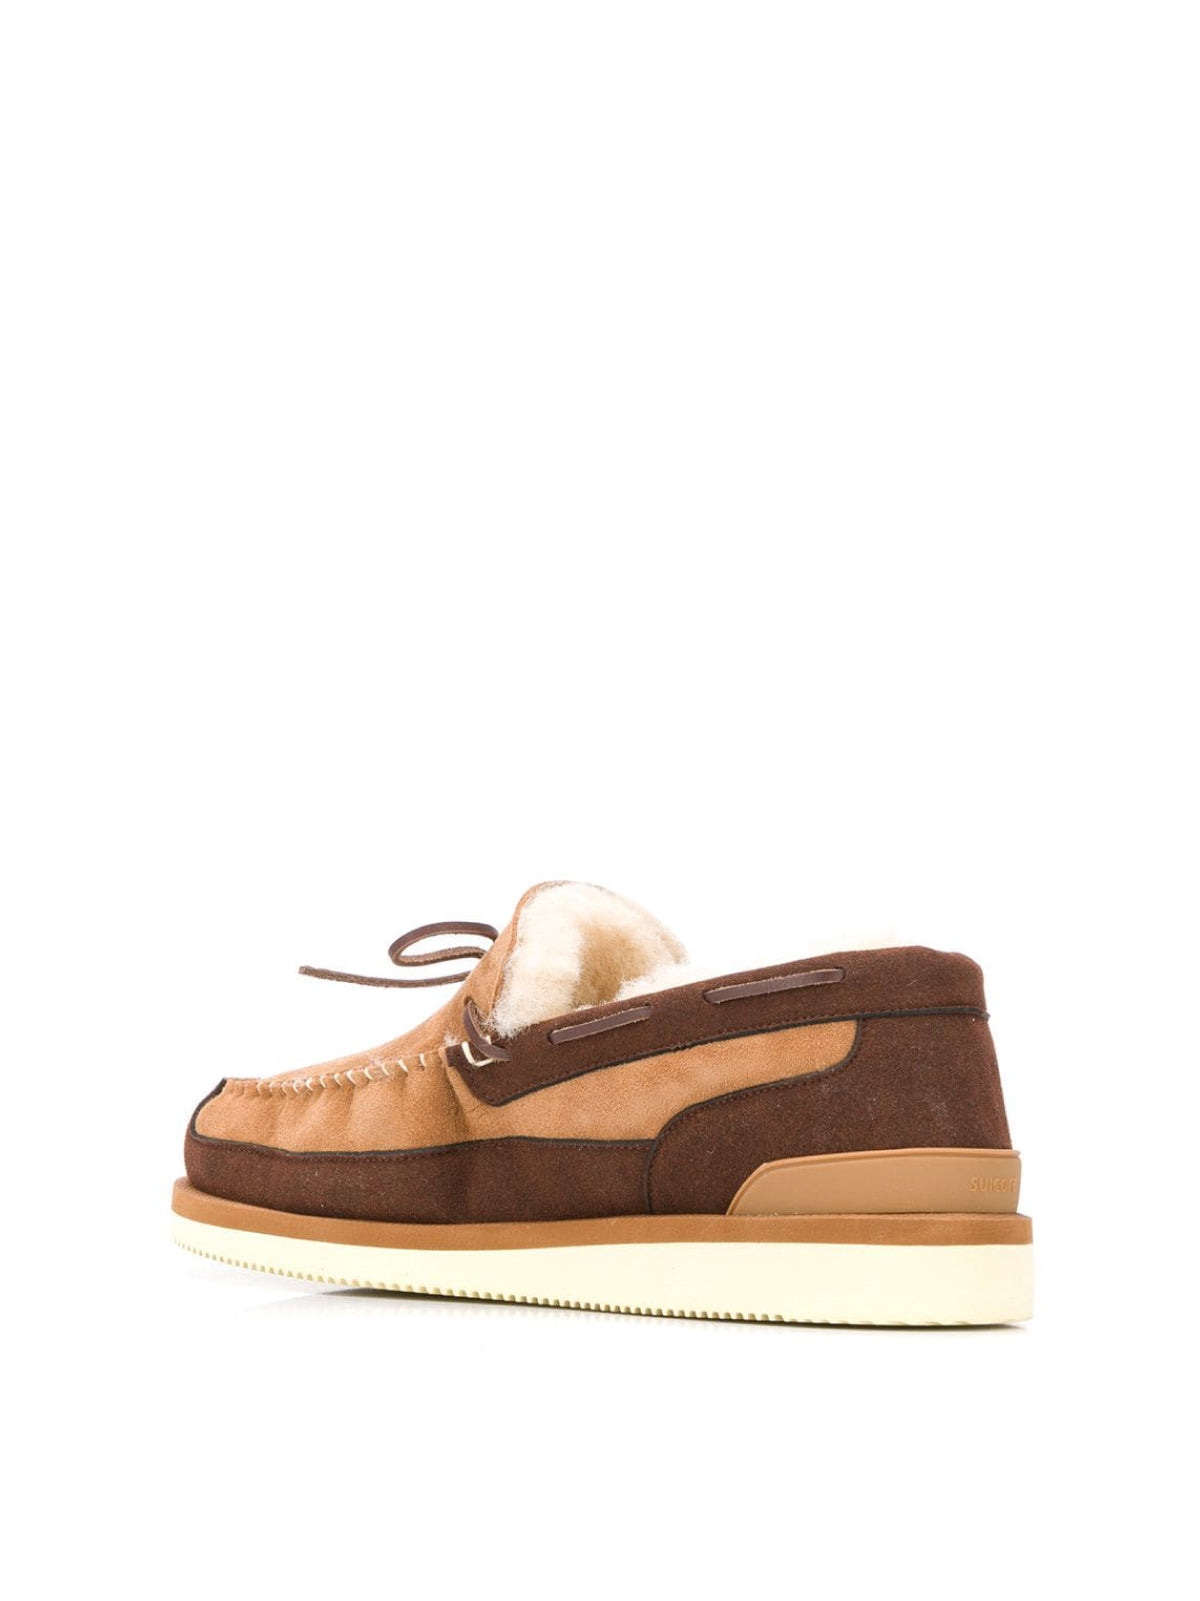 Suicoke-OUTLET-SALE-Shearling-Lined Loafers-ARCHIVIST